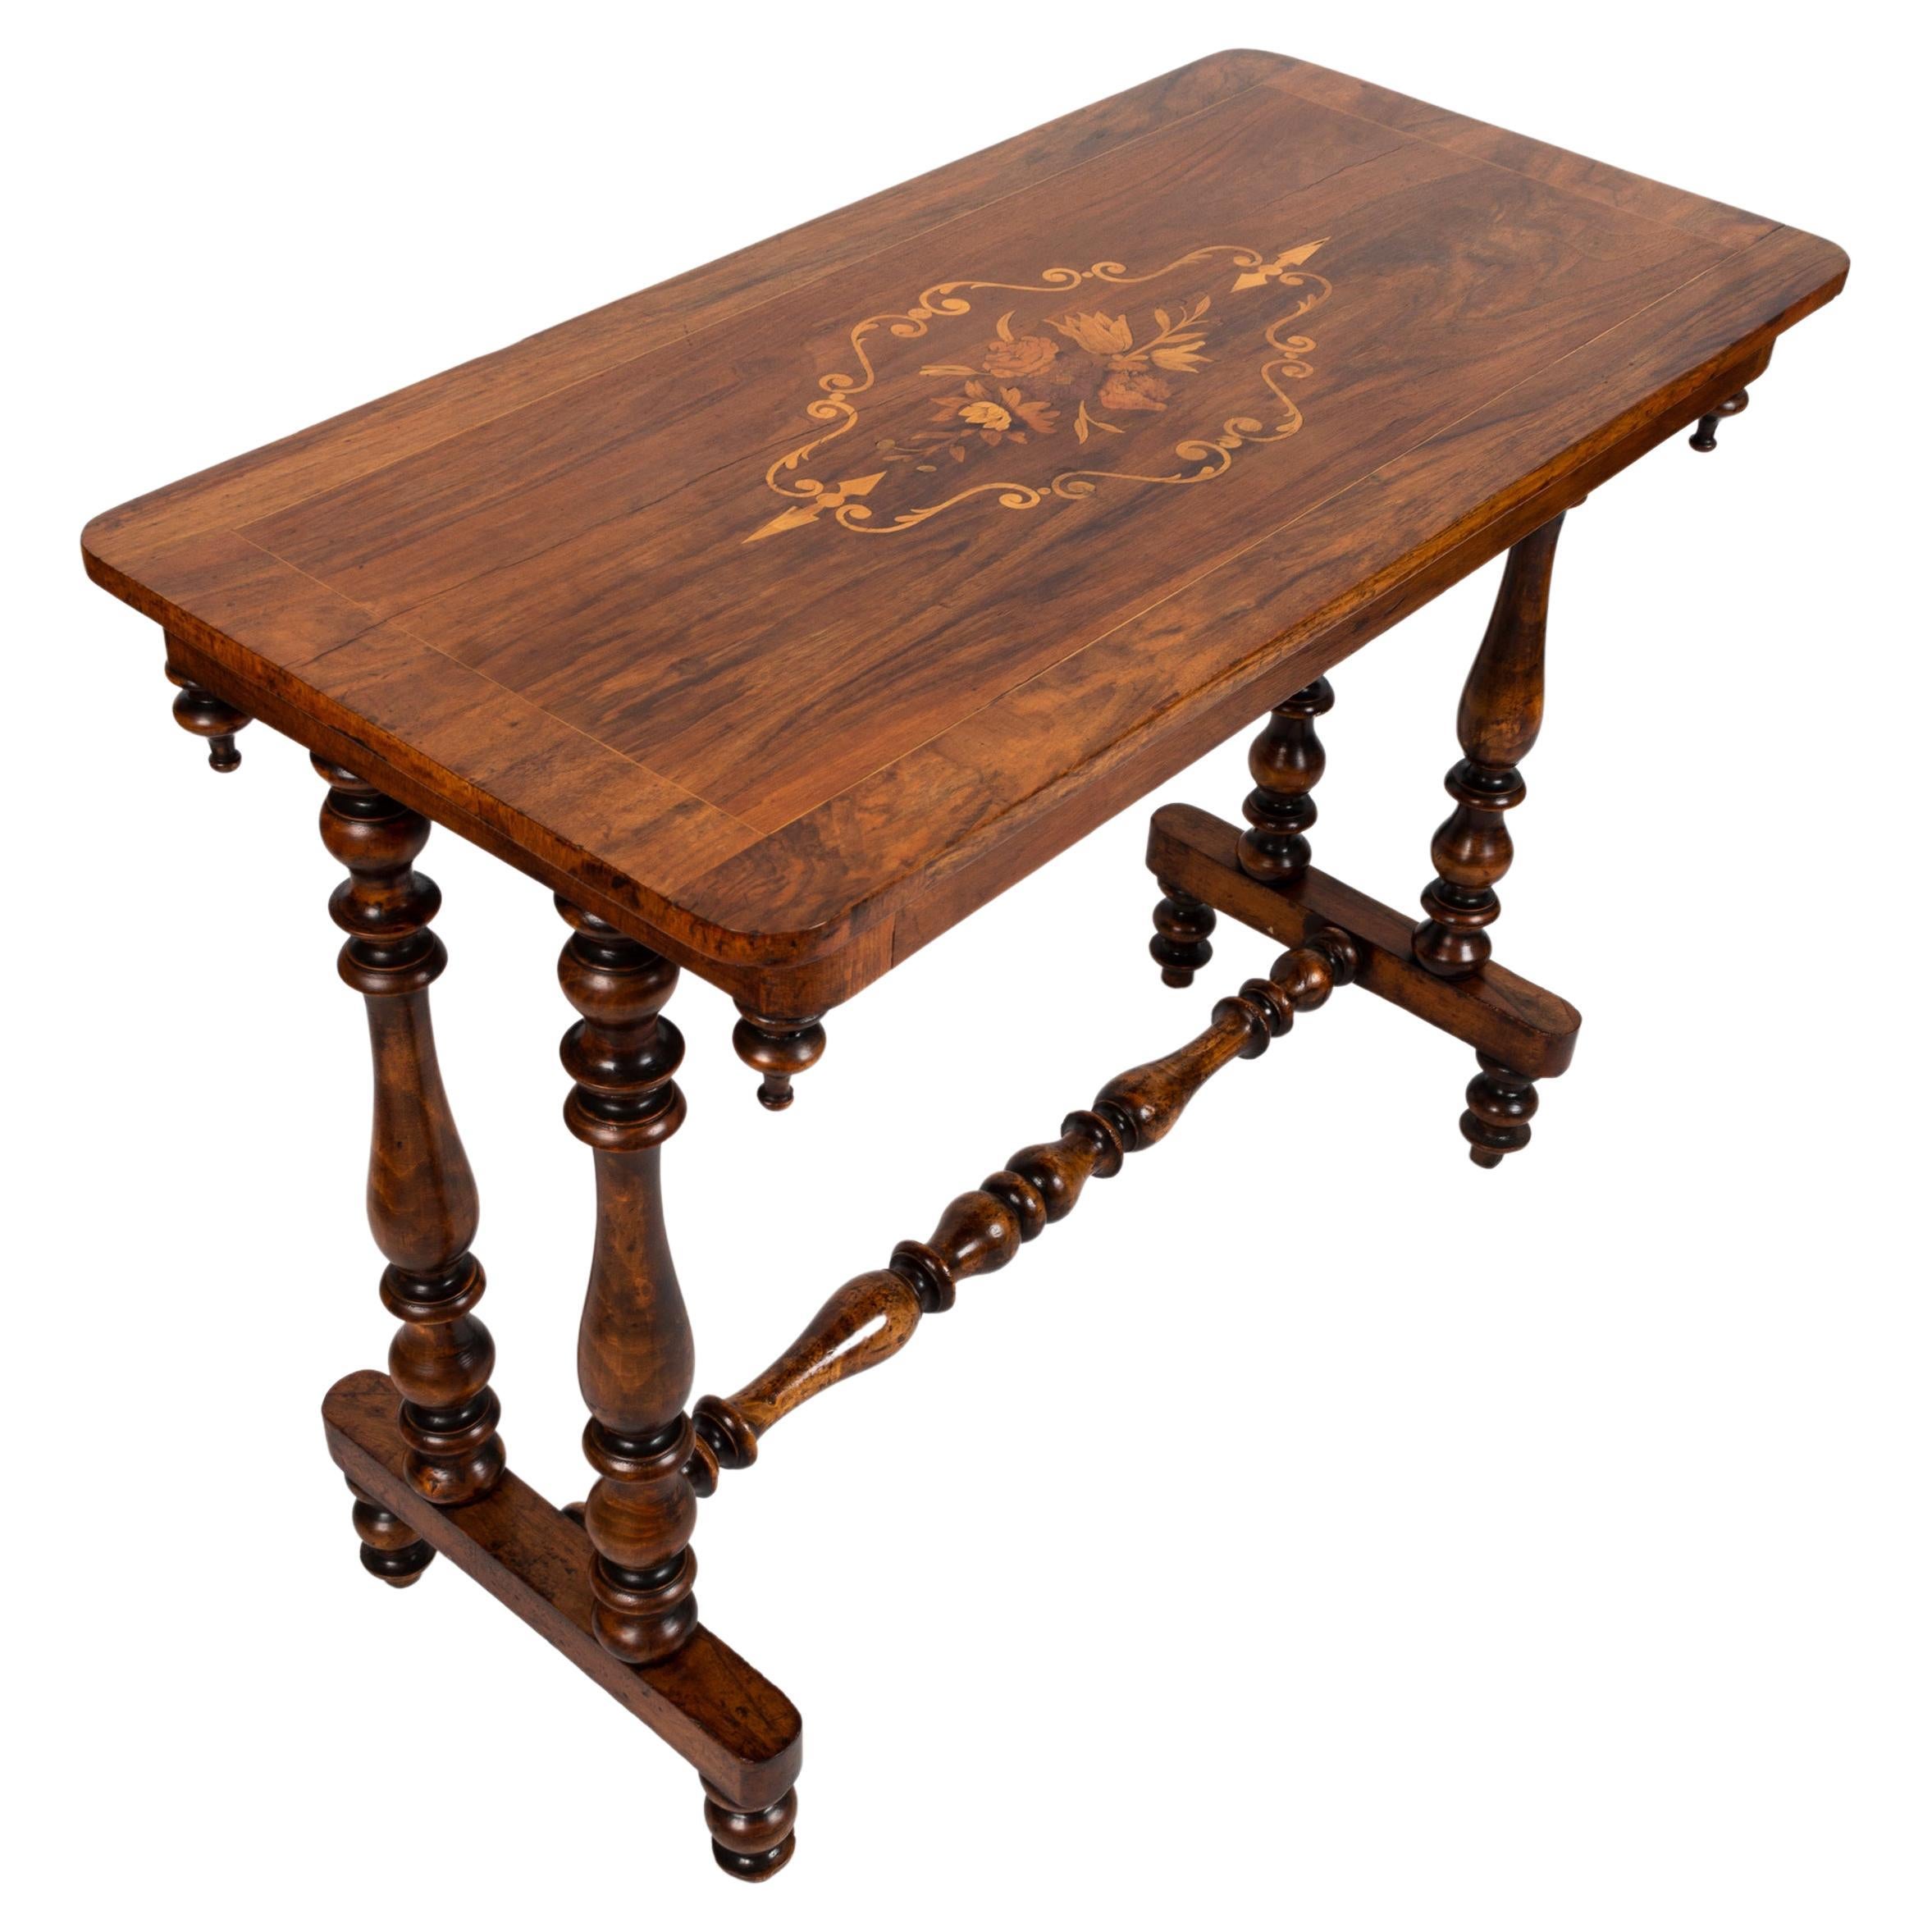 Antique English Edwardian Inlaid Walnut Hall Table Console C.1900 For Sale